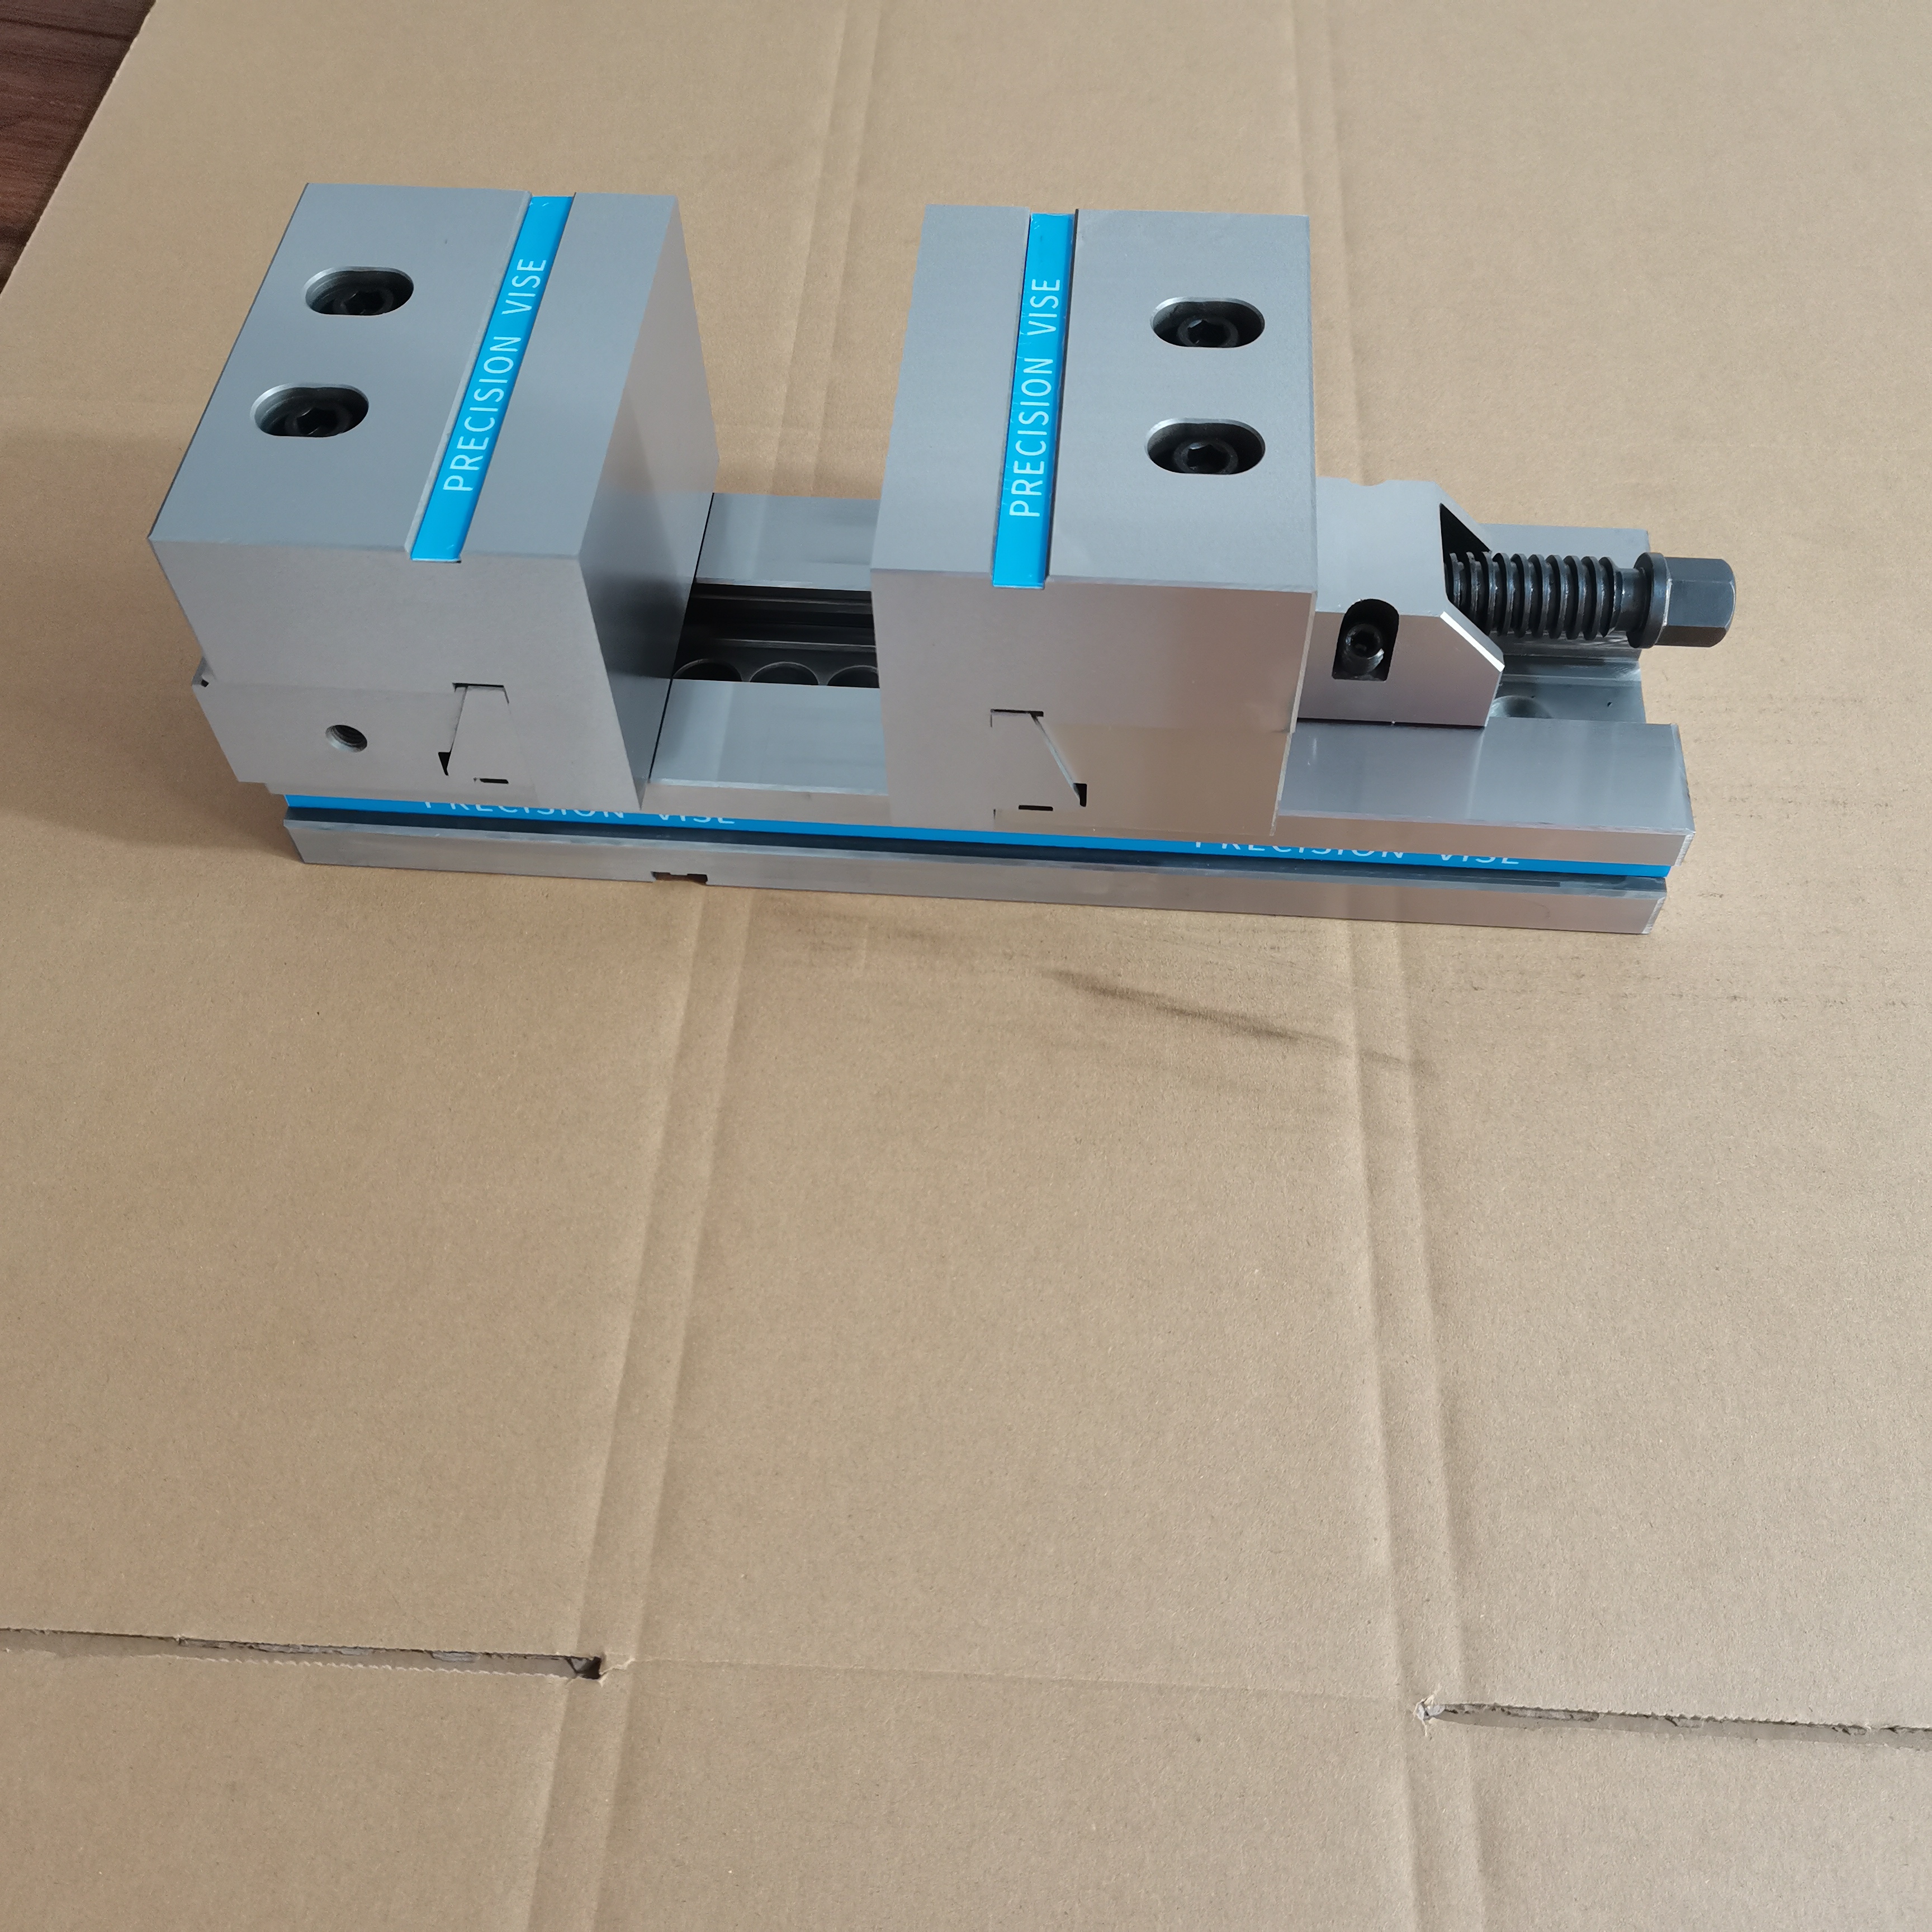 CNC Milling Machine Vise GT Precision Modular Vise with Elevation Jaws